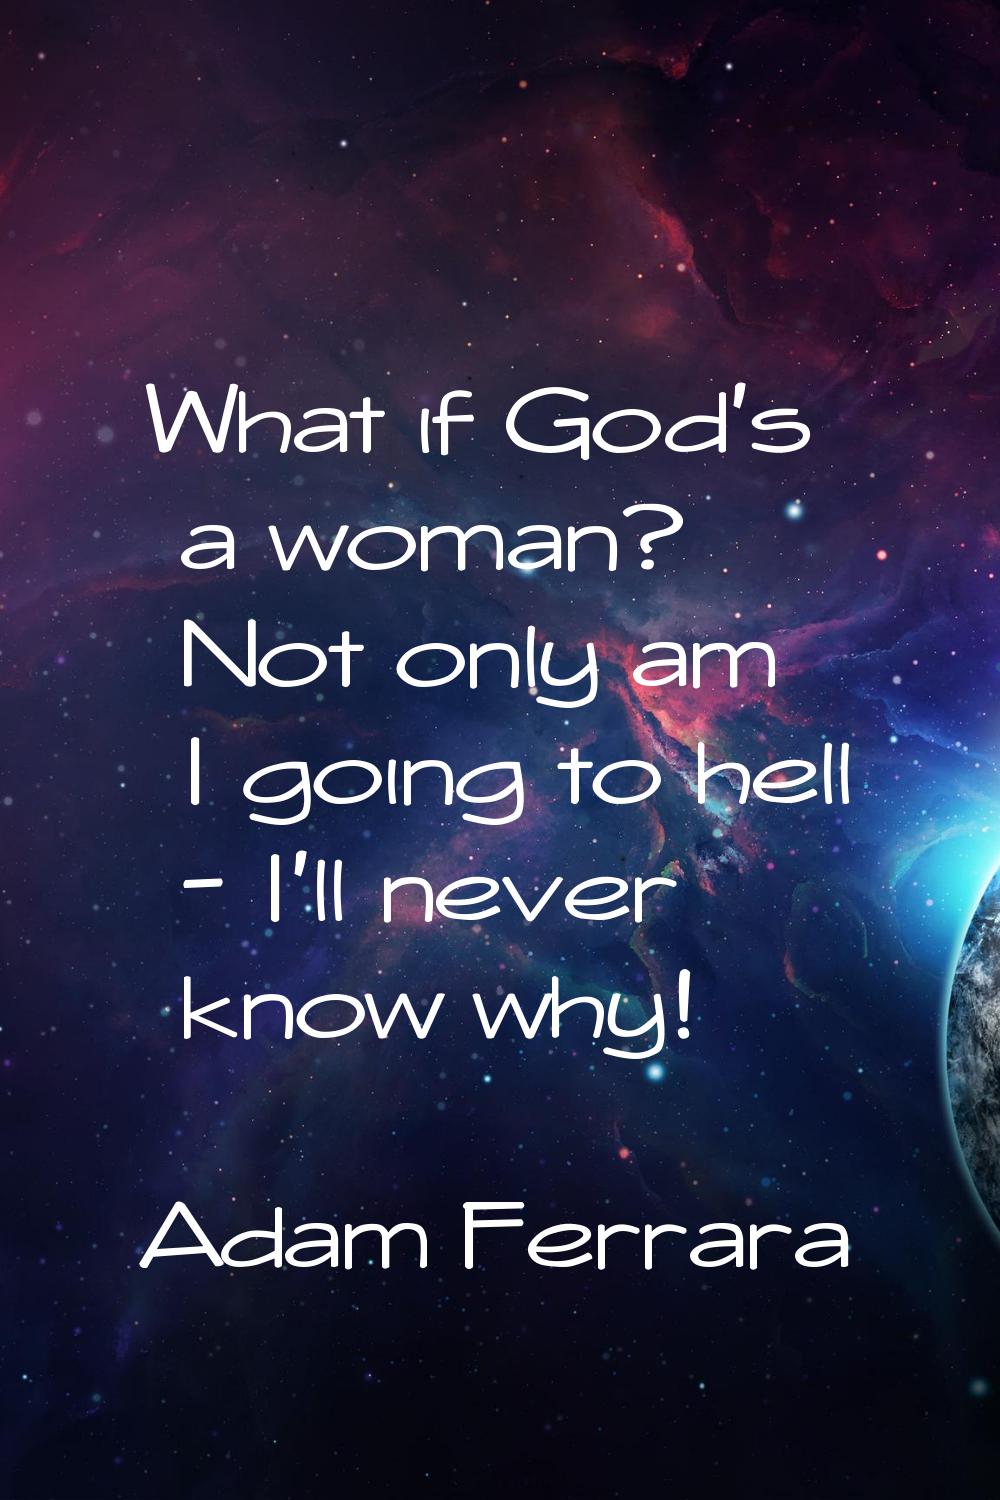 What if God's a woman? Not only am I going to hell - I'll never know why!